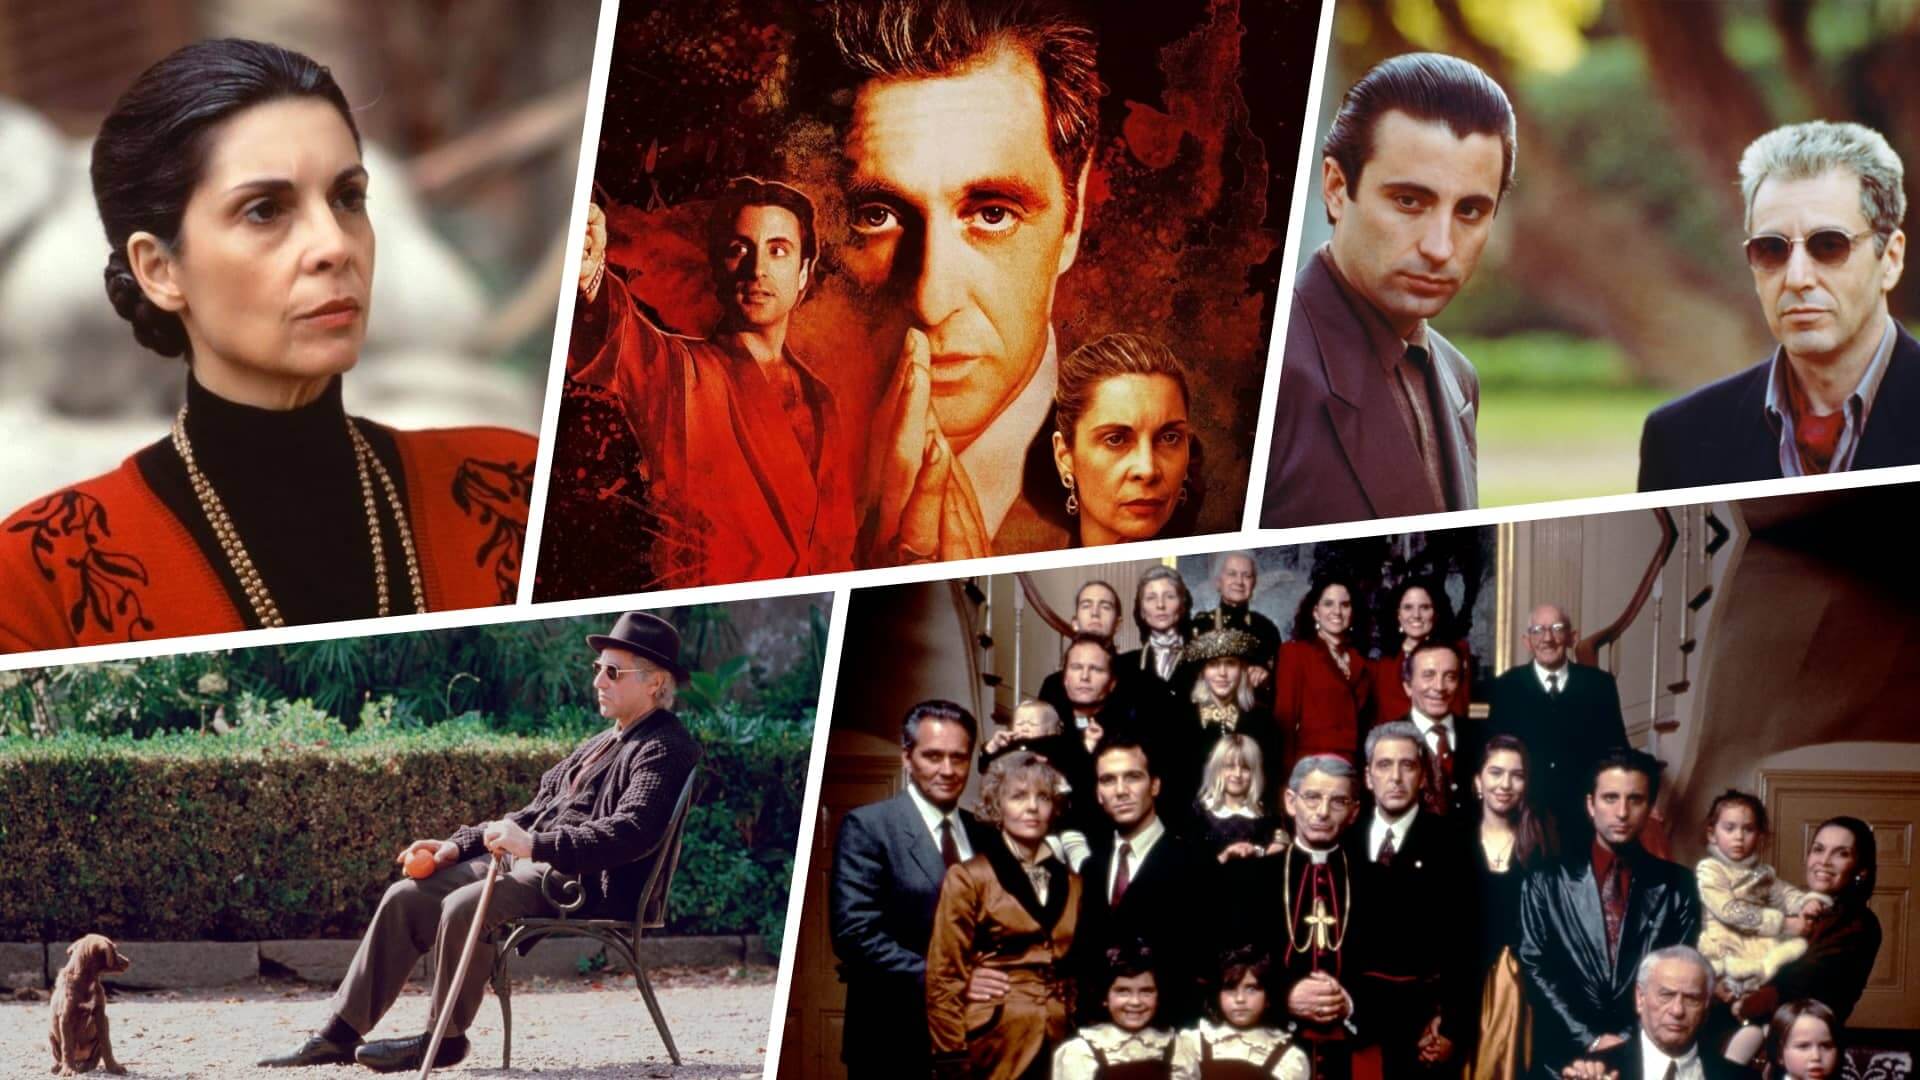 The Godfather Part III Ending Explained